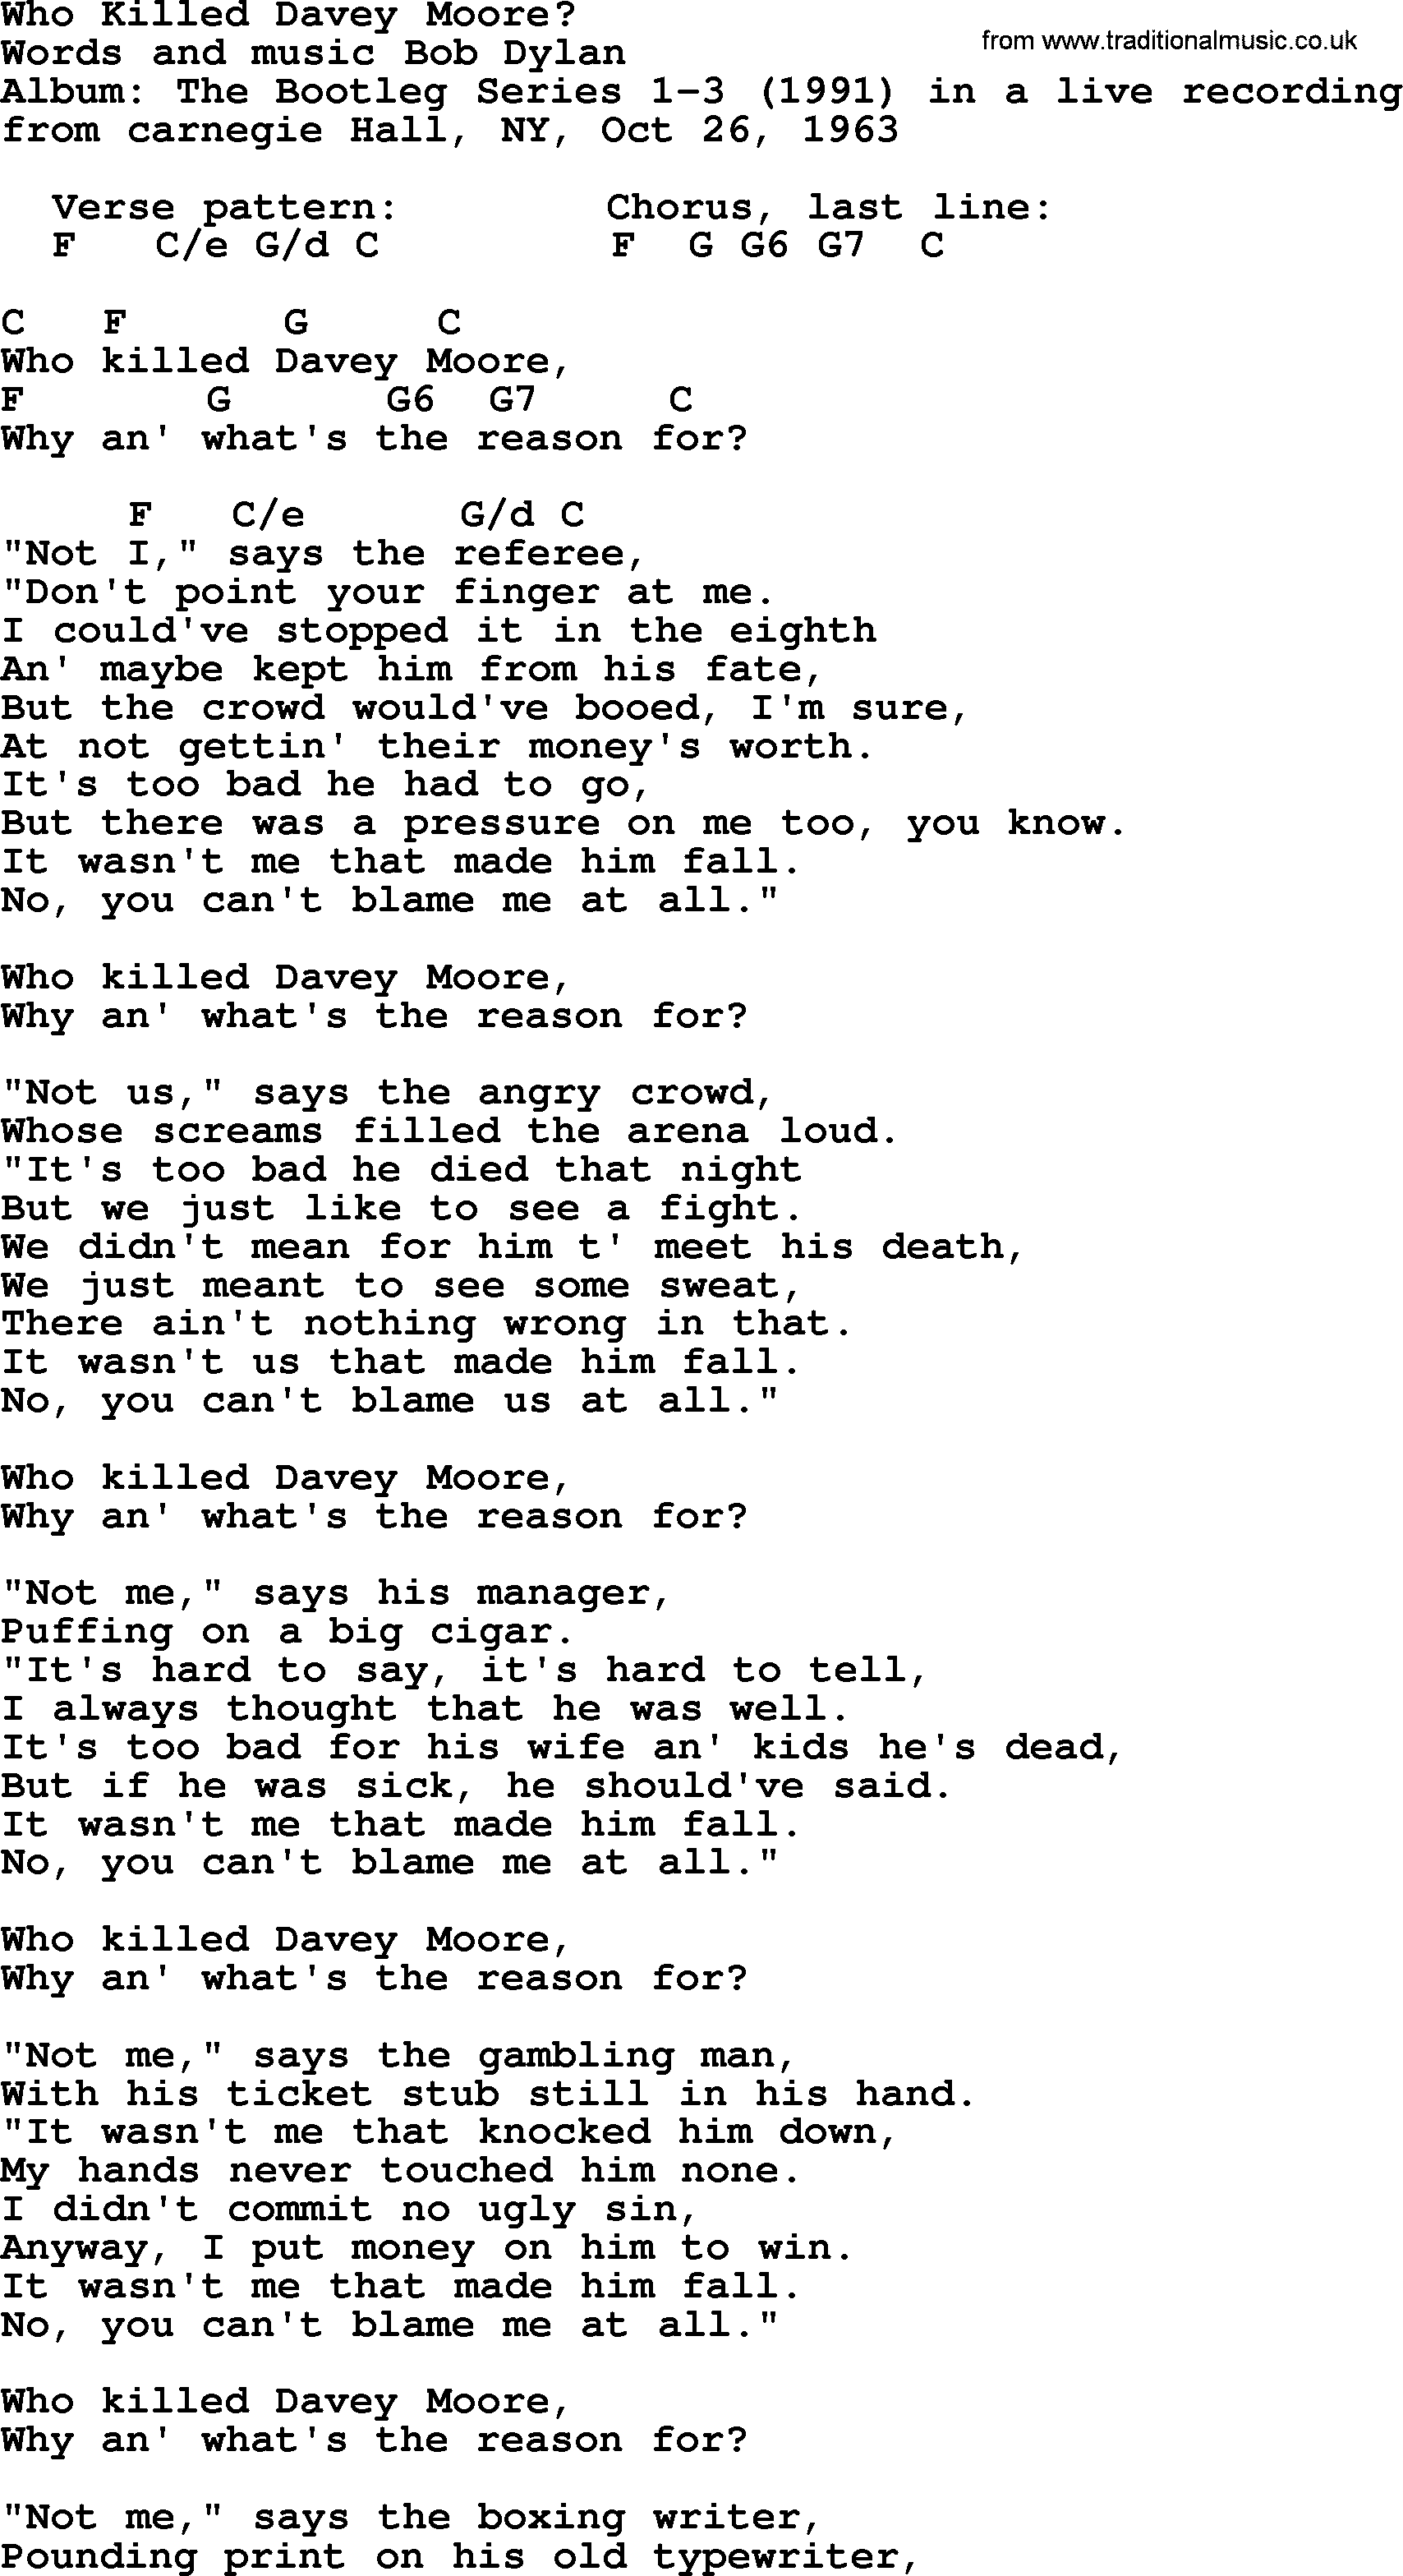 Bob Dylan song, lyrics with chords - Who Killed Davey Moore